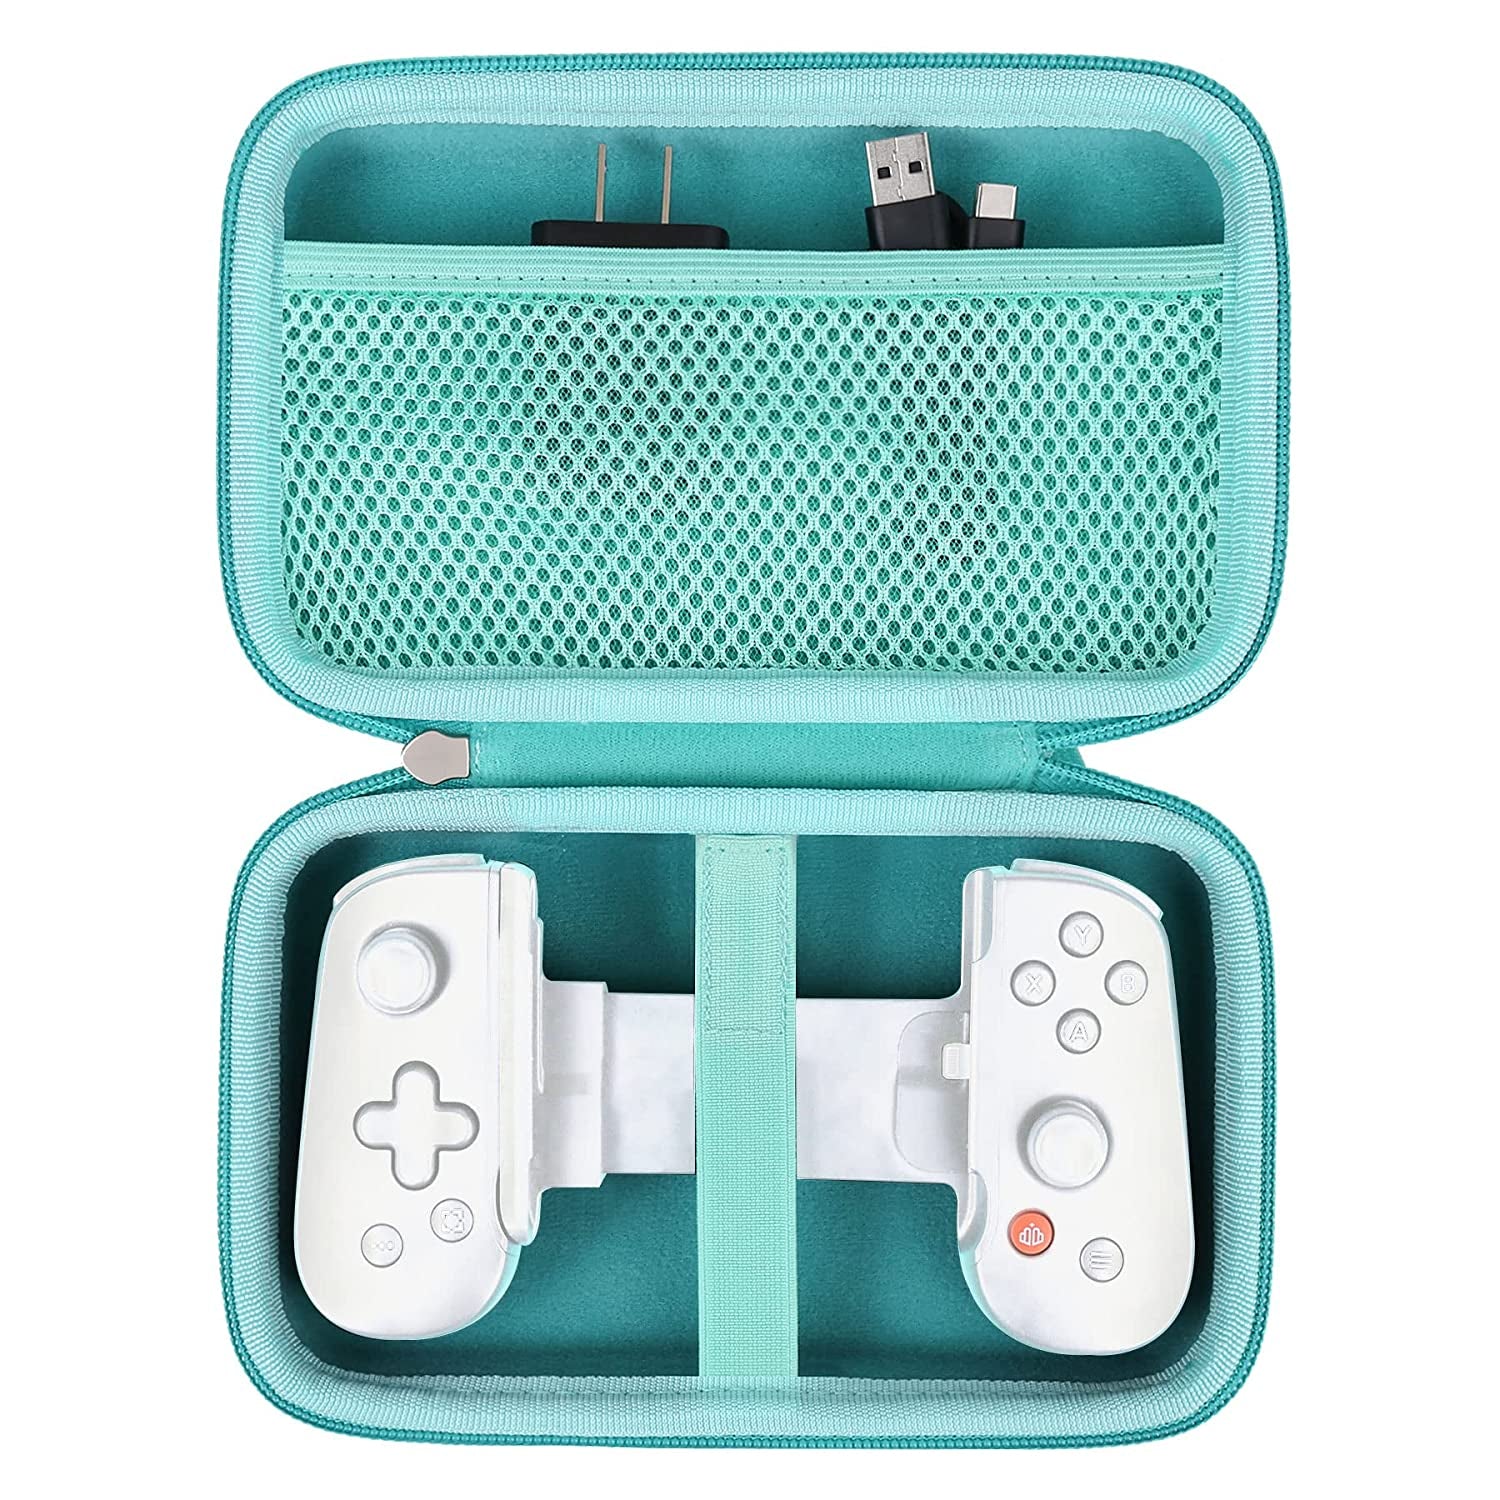 Mobile Gaming Controller Carrying Case Compatible with Backbone One Ios Mobile Gaming Gamepad/Controller, Case Only (Teal)